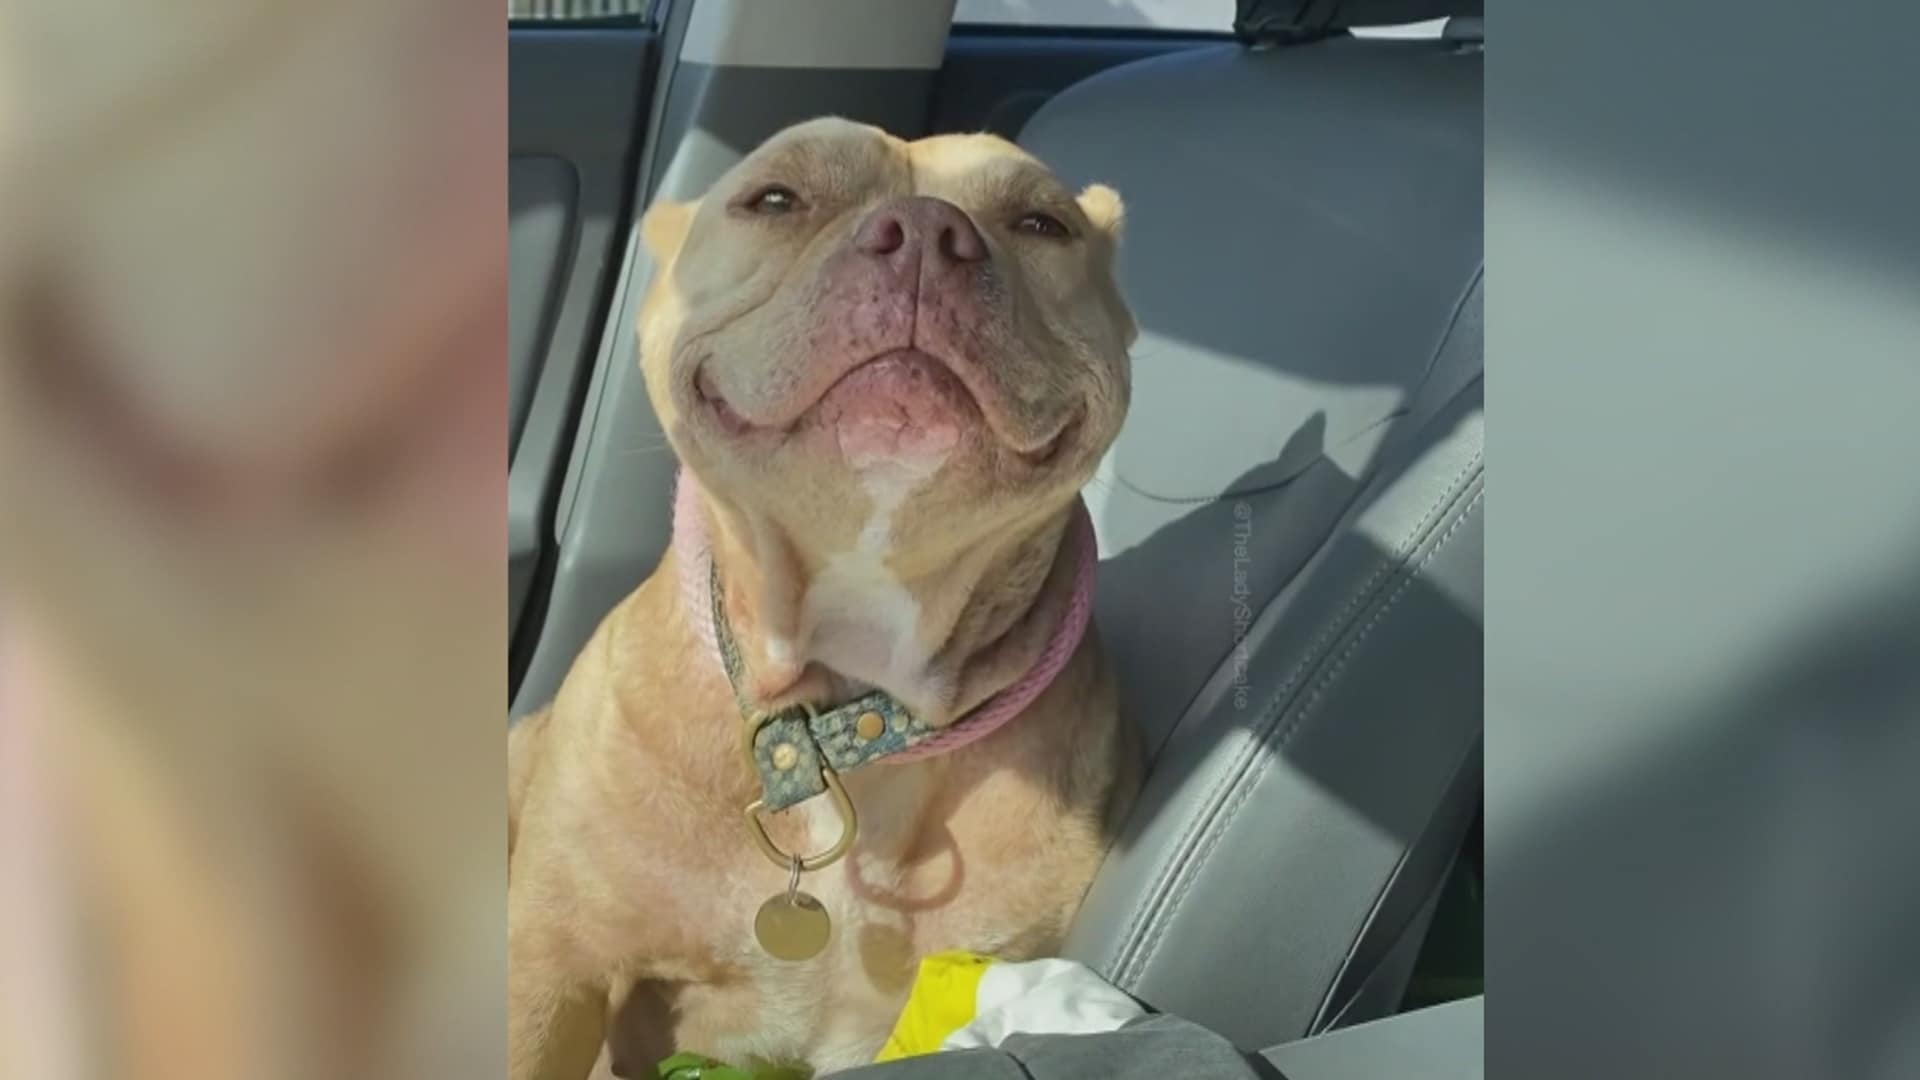 CTV Your Morning | This adorable smiling rescue dog will melt your ...